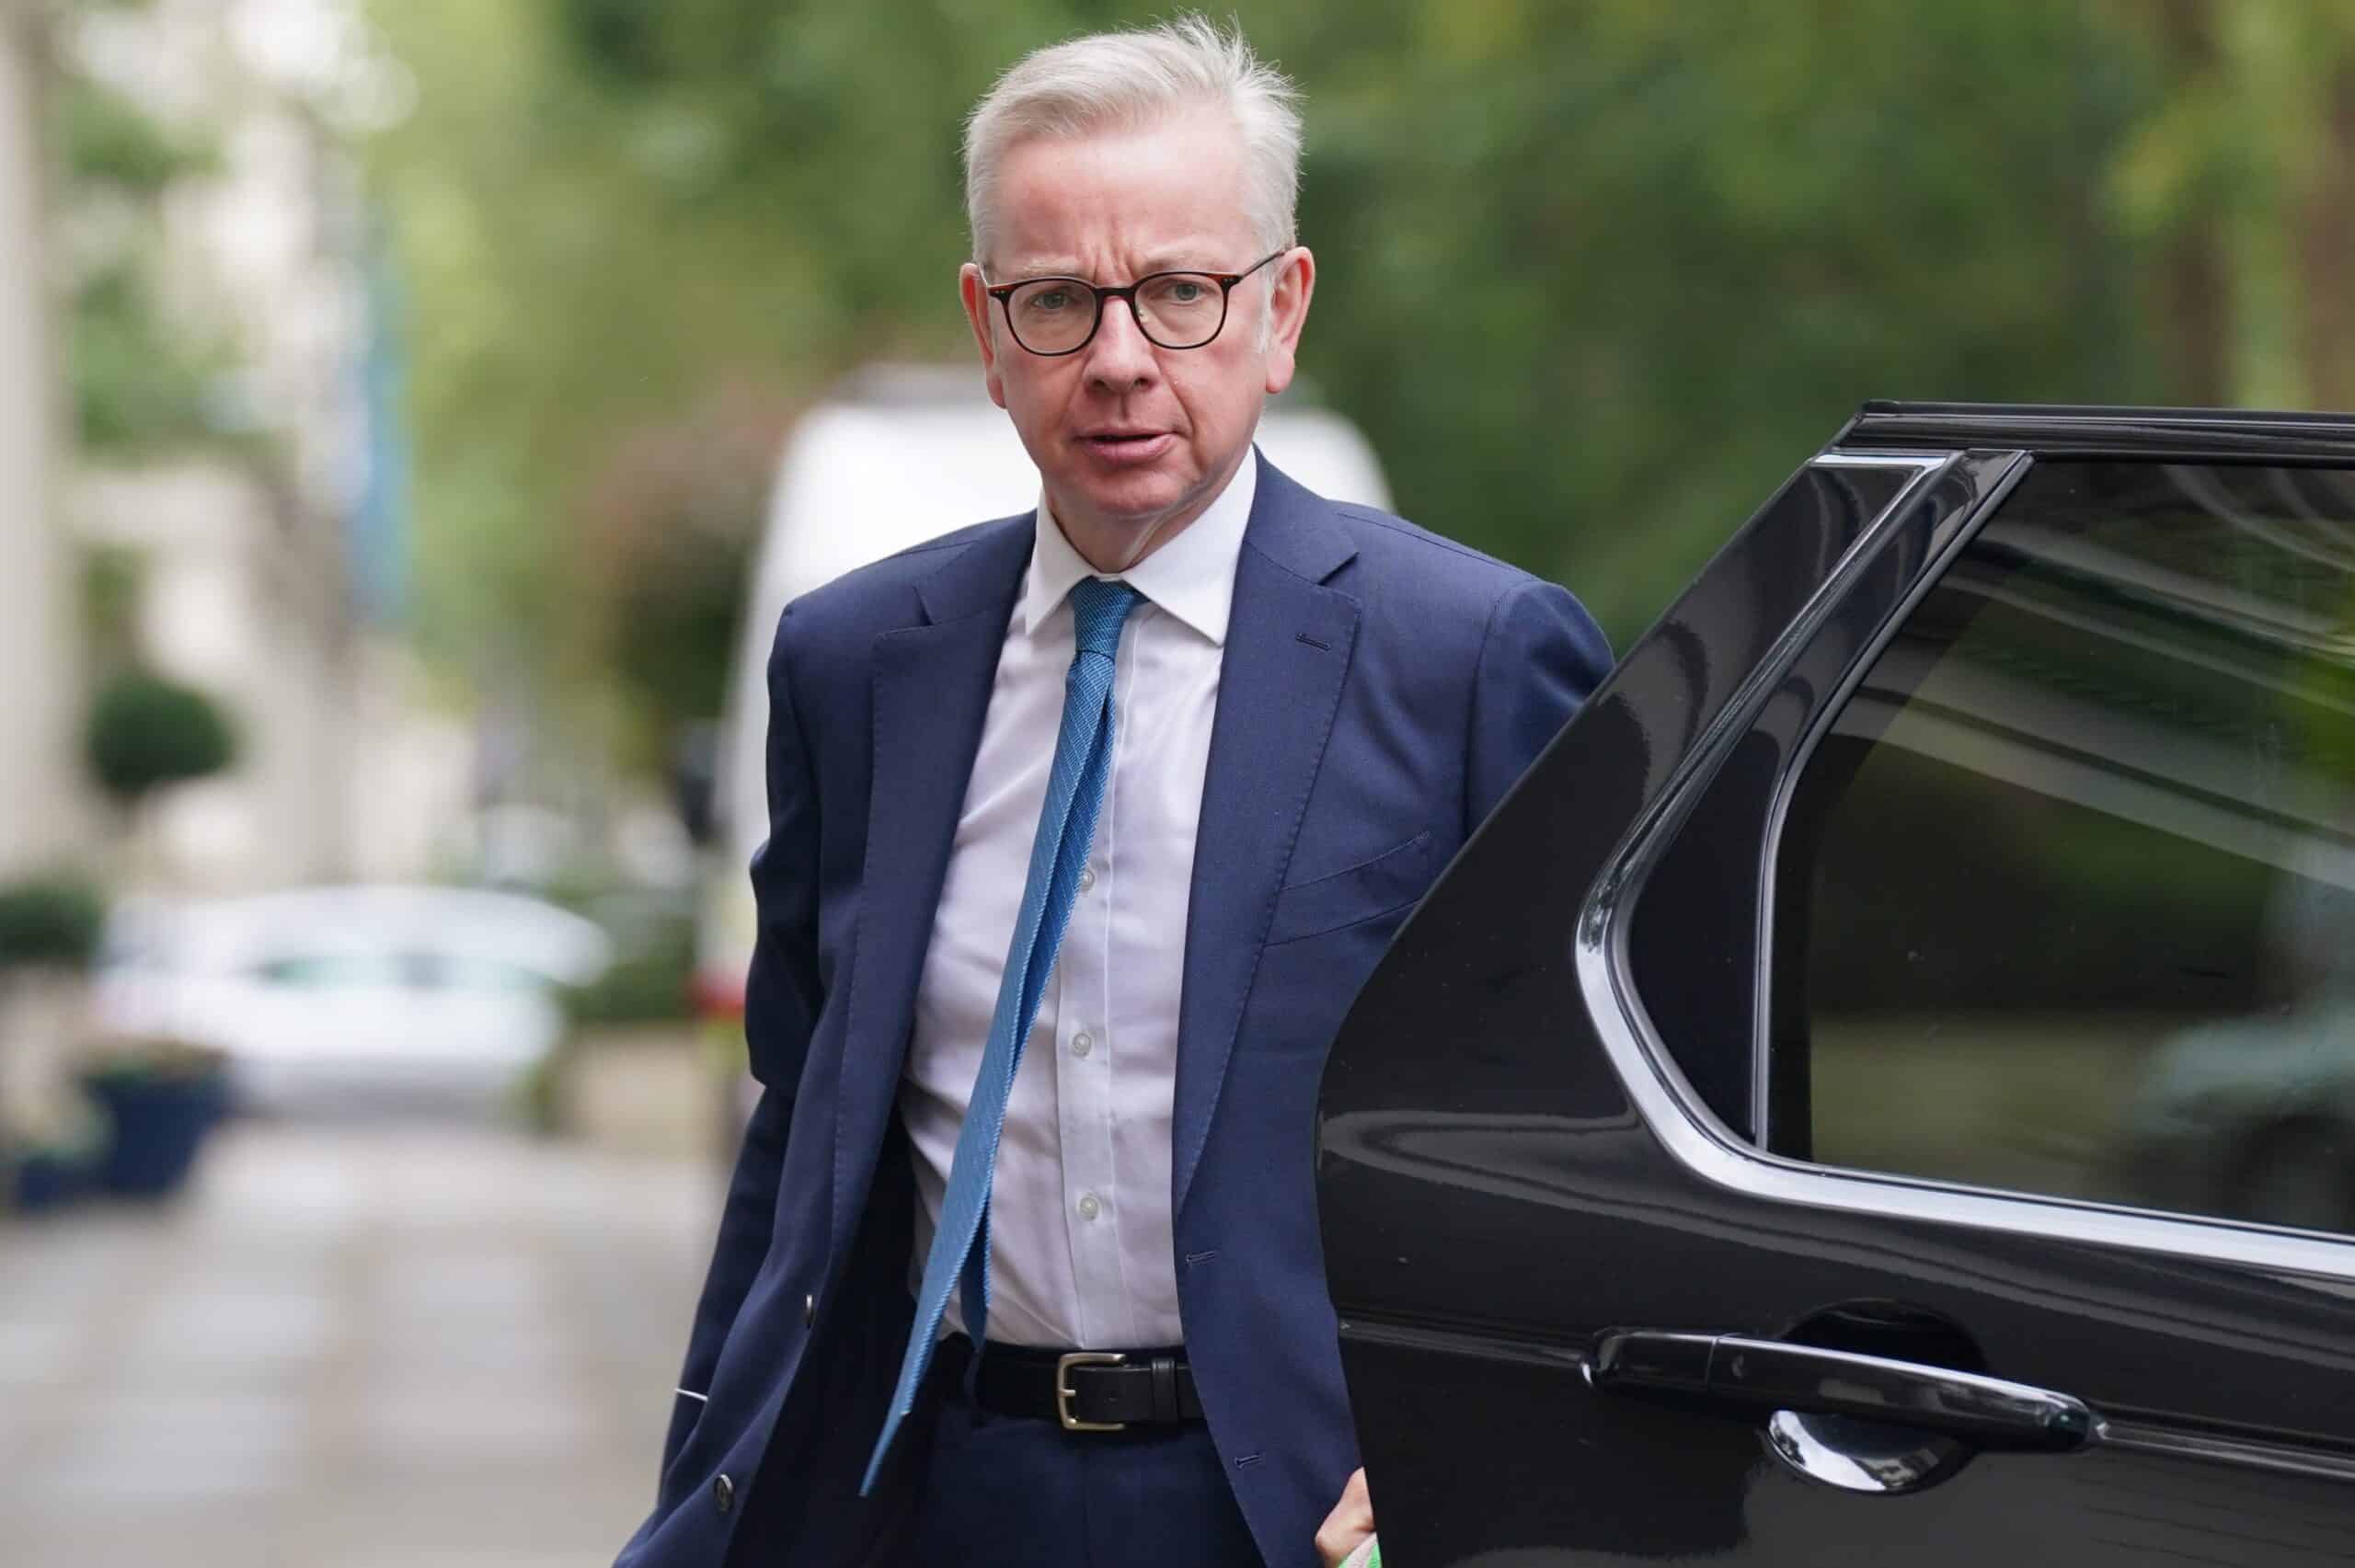 Gove placed under investigation by Commons standards watchdog